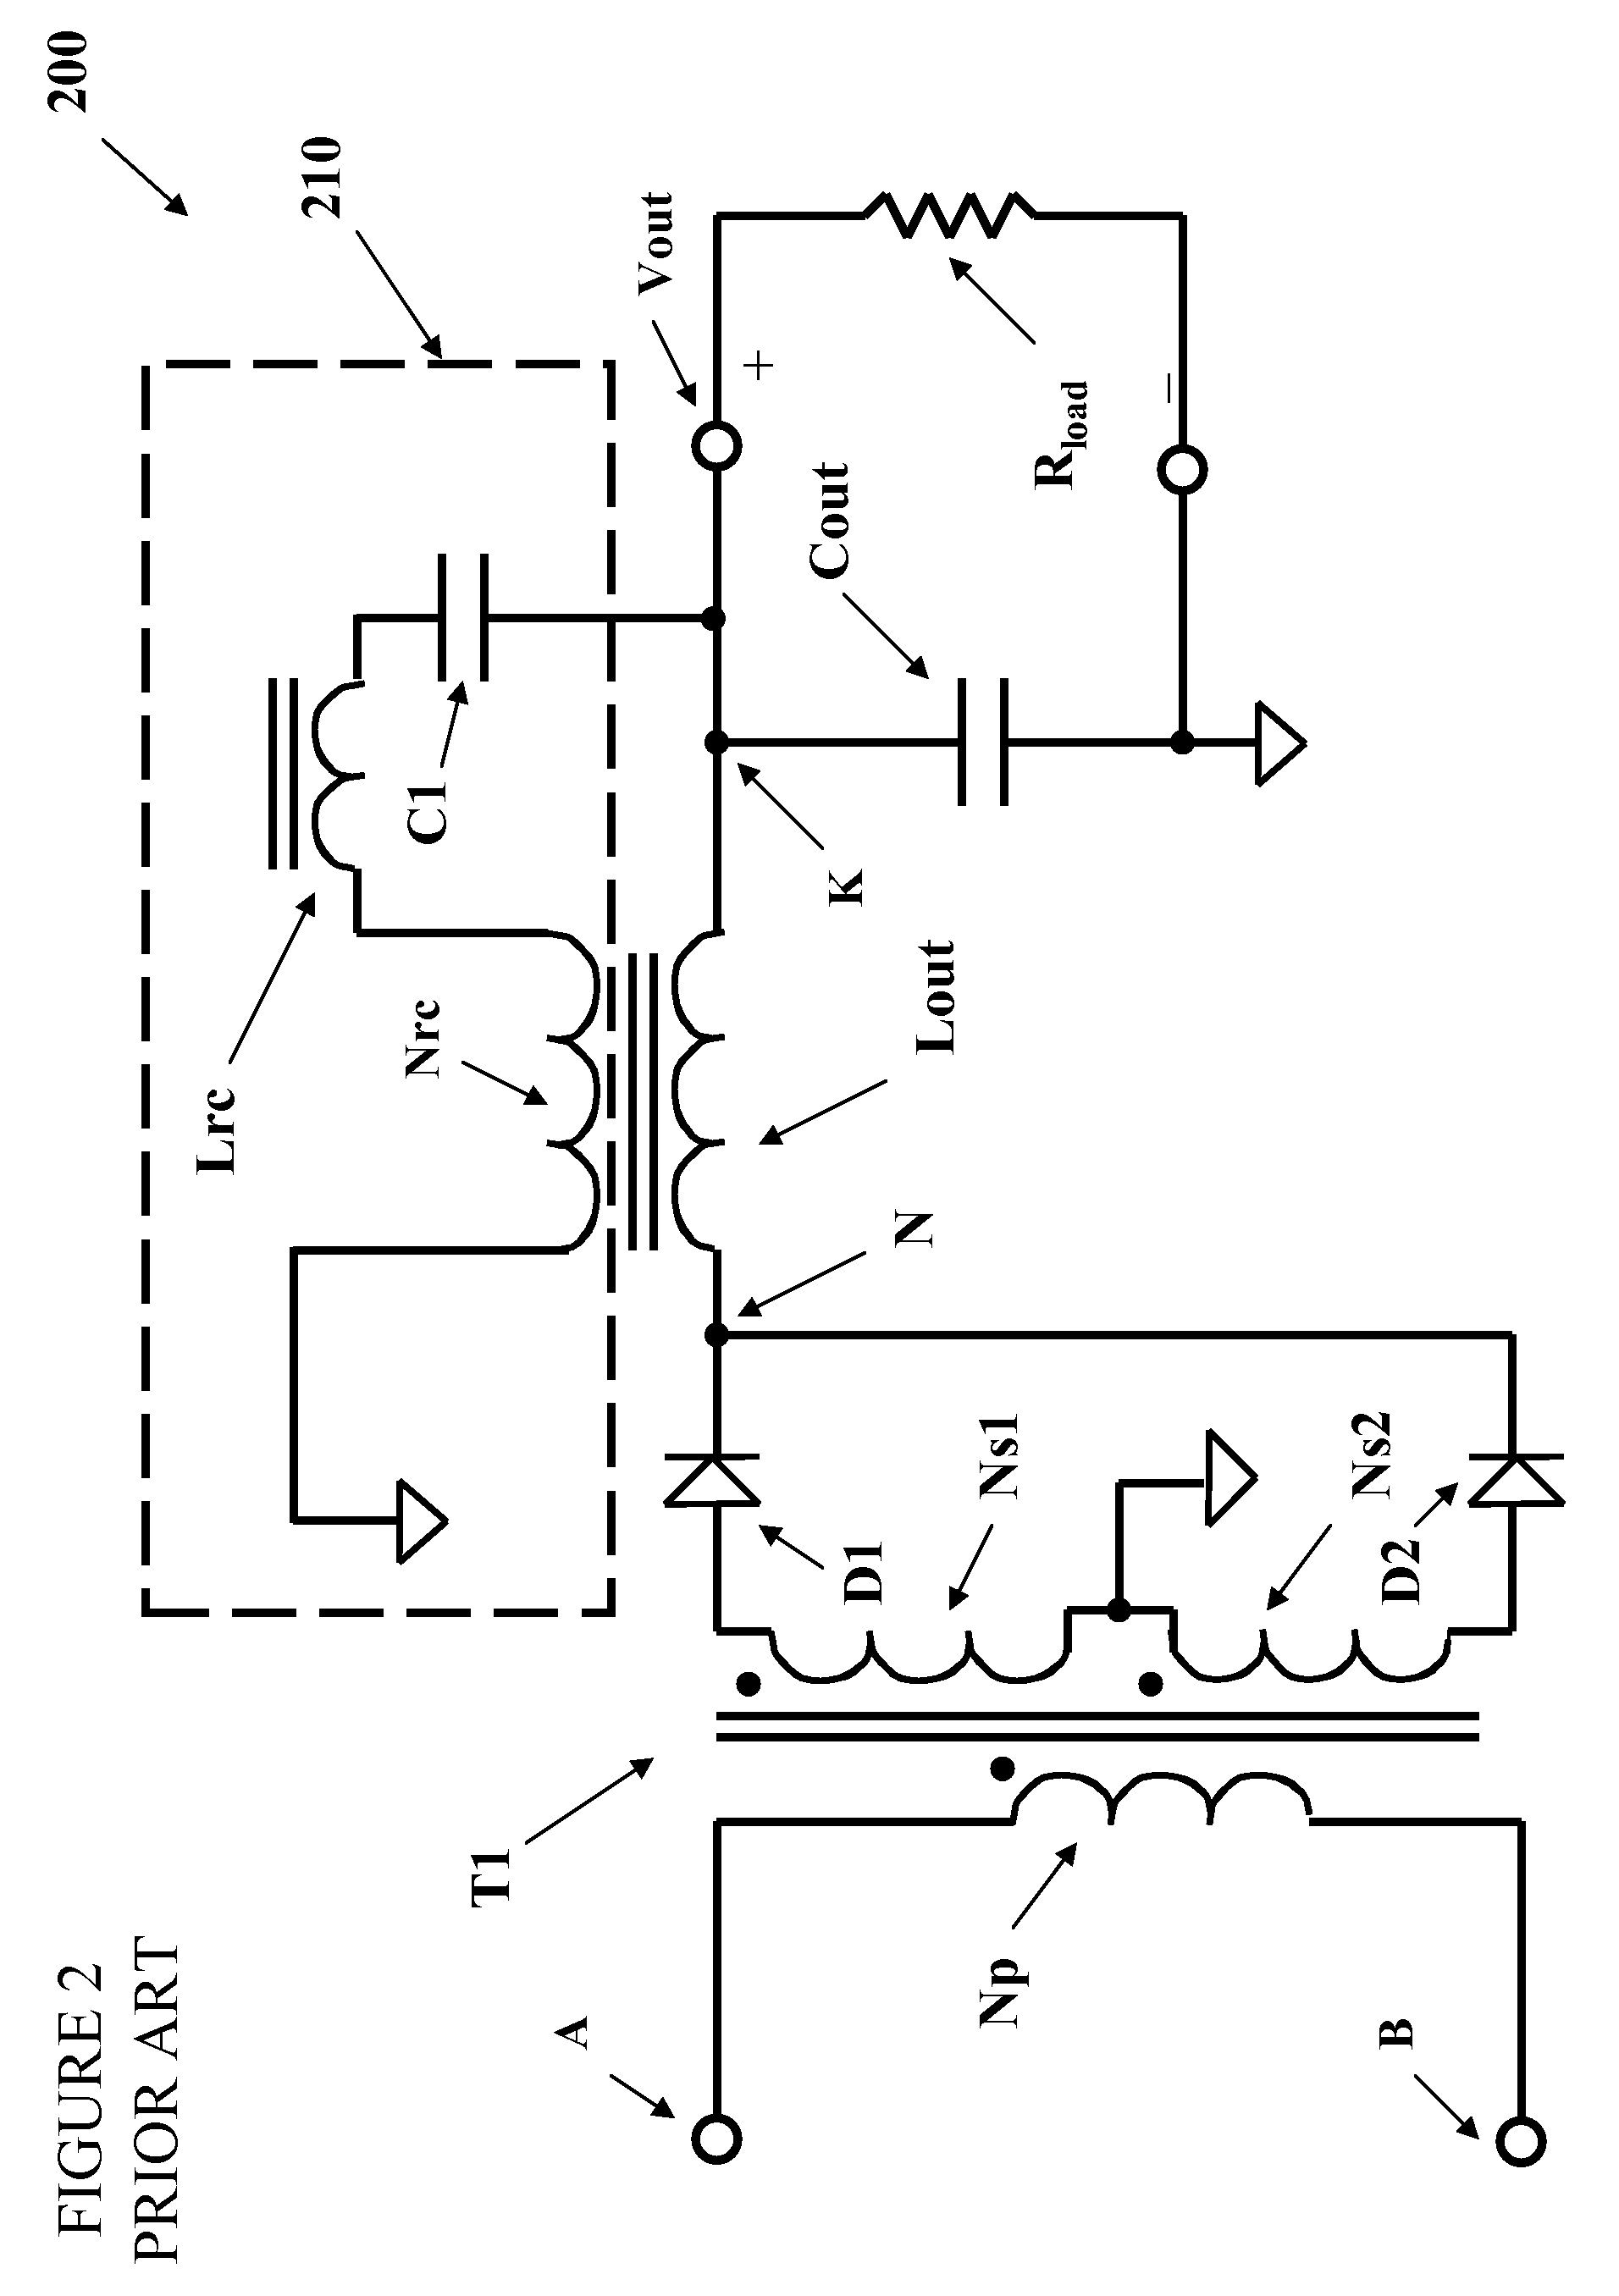 Ripple reduction for switch-mode power conversion